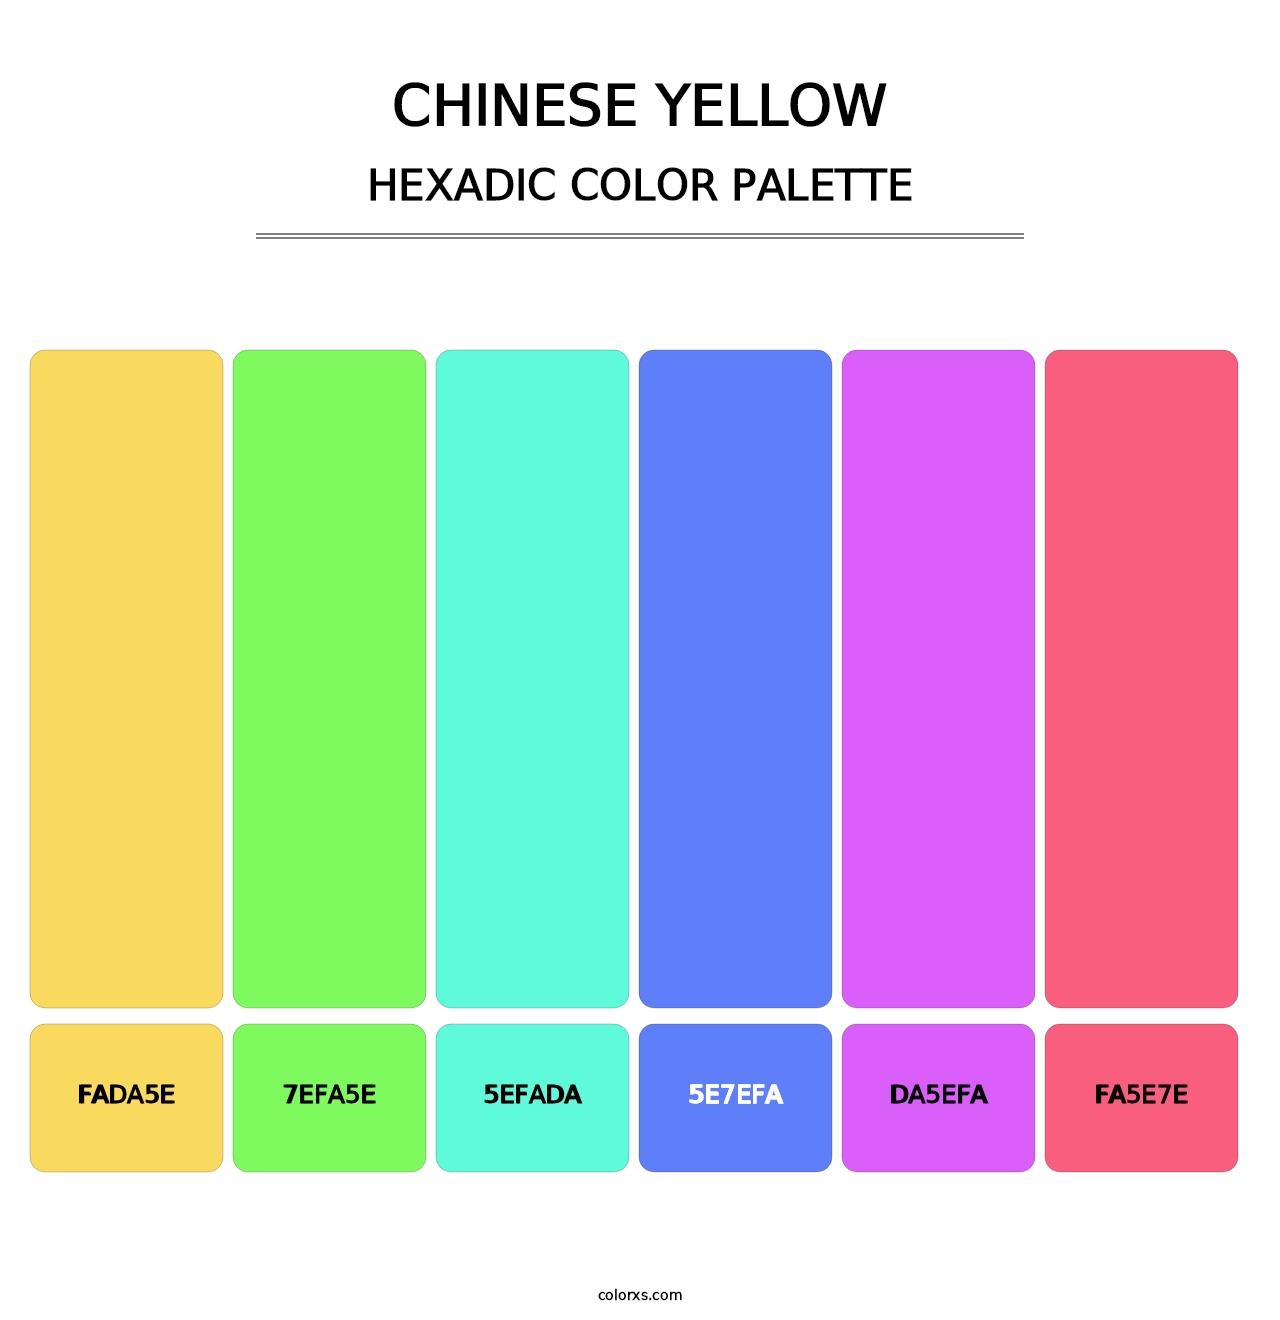 Chinese Yellow - Hexadic Color Palette